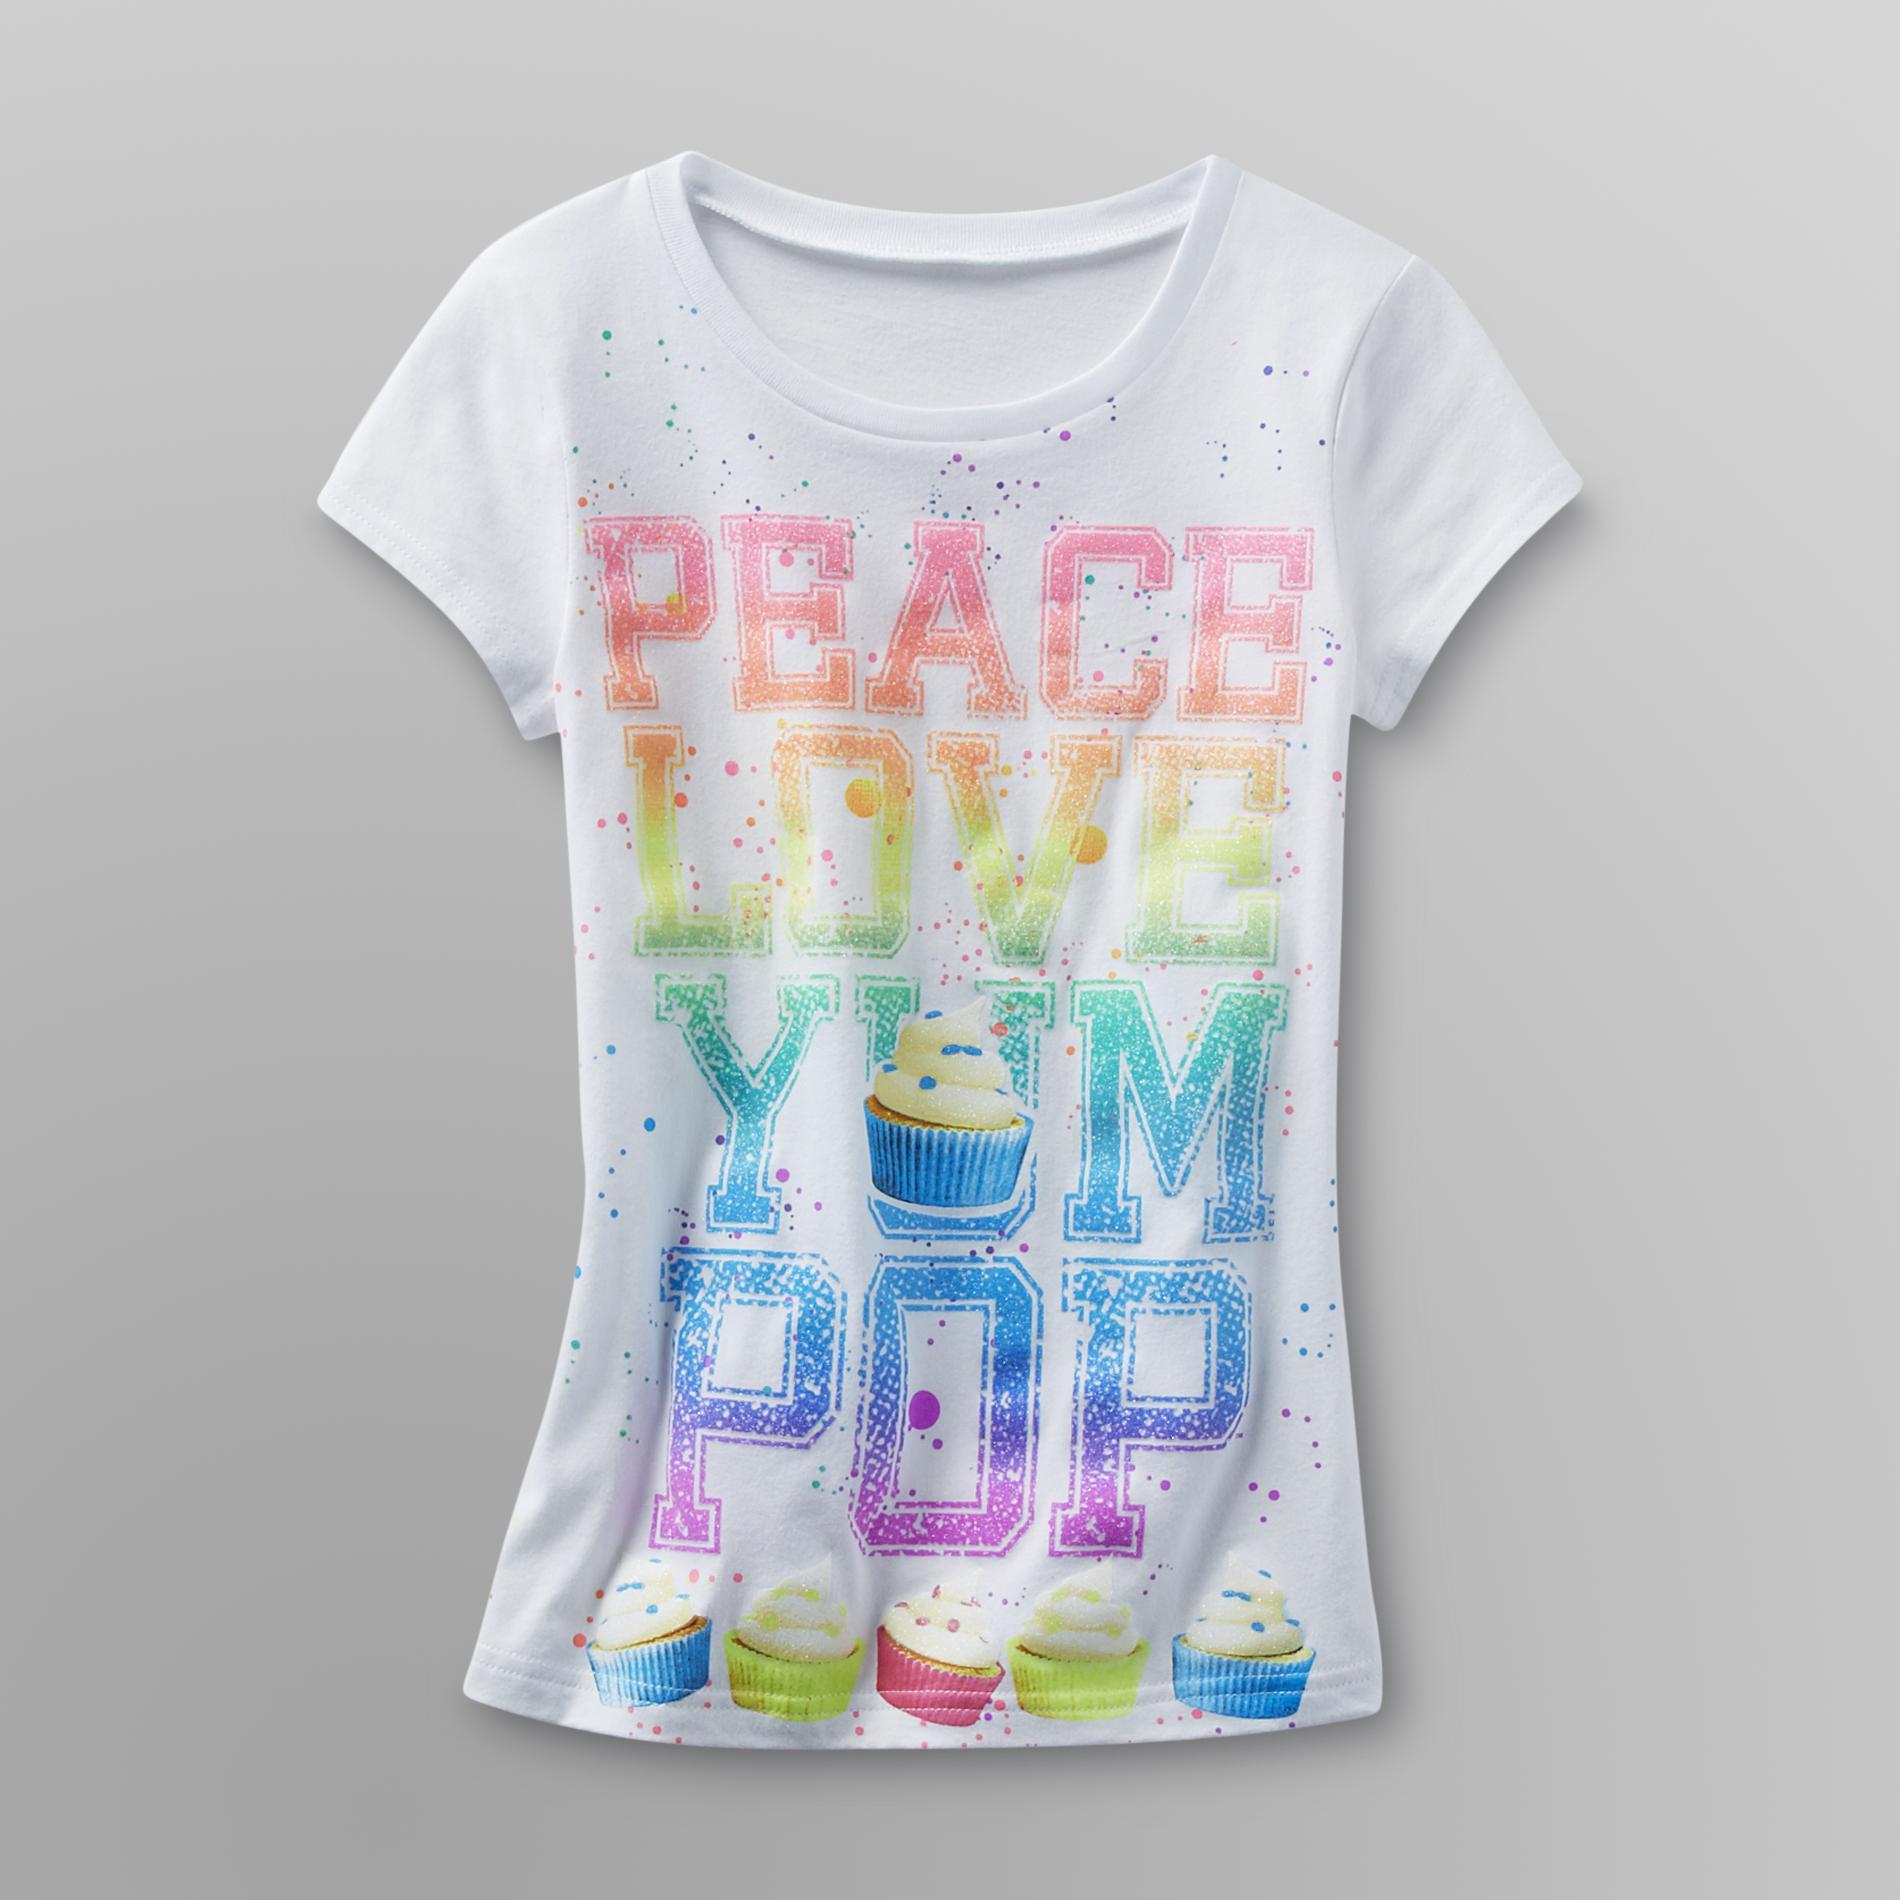 Yum Pop Girl's Graphic Scented T-Shirt - Peace/Love